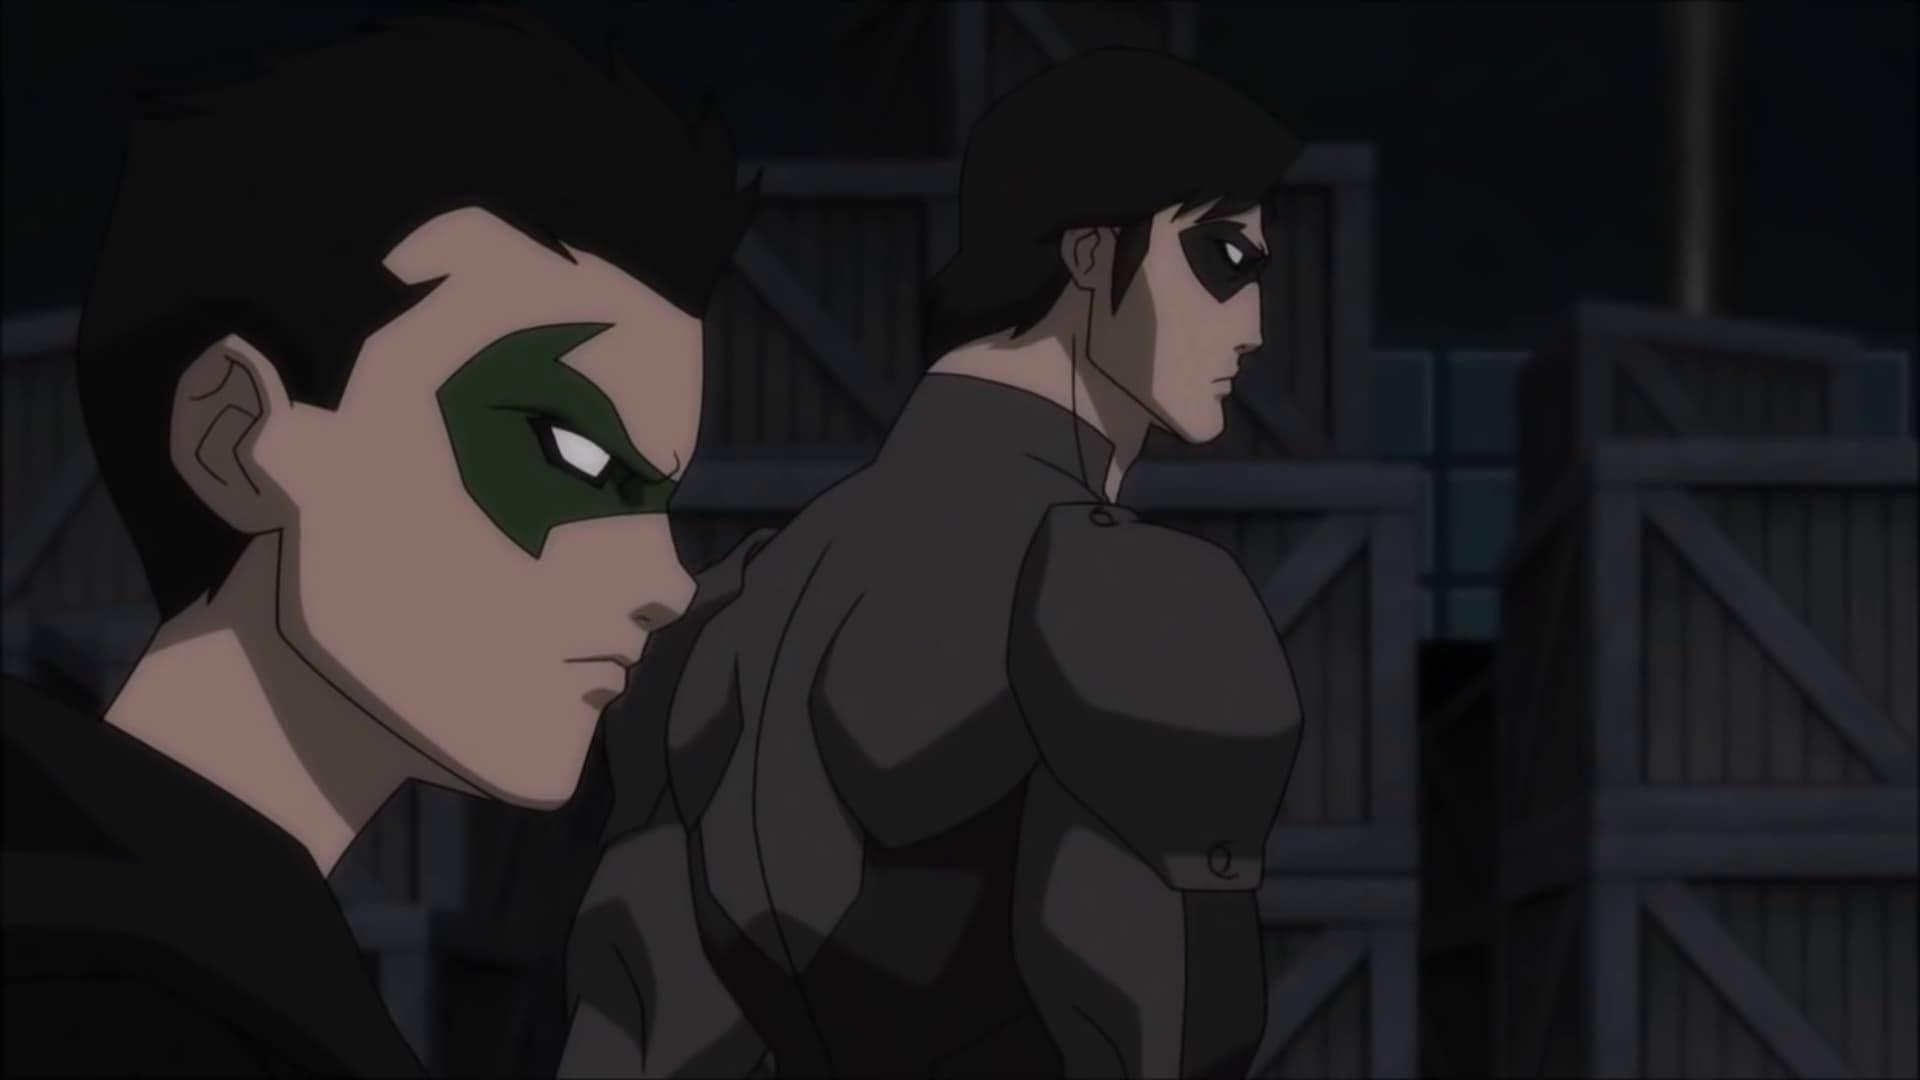 Nightwing and Robin backdrop